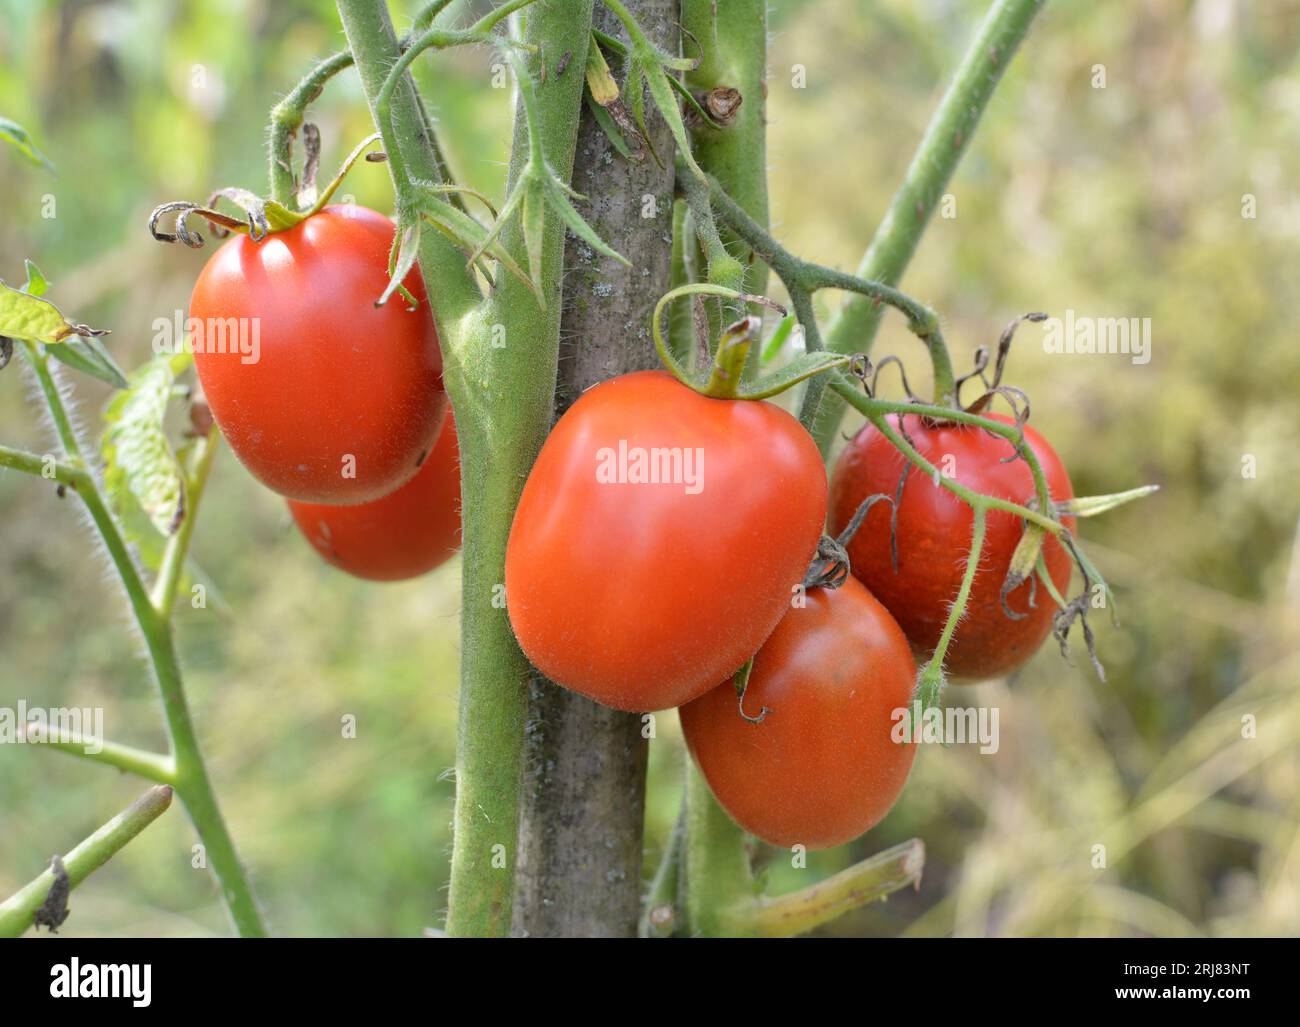 Tomatoes are grown in open organic soil Stock Photo